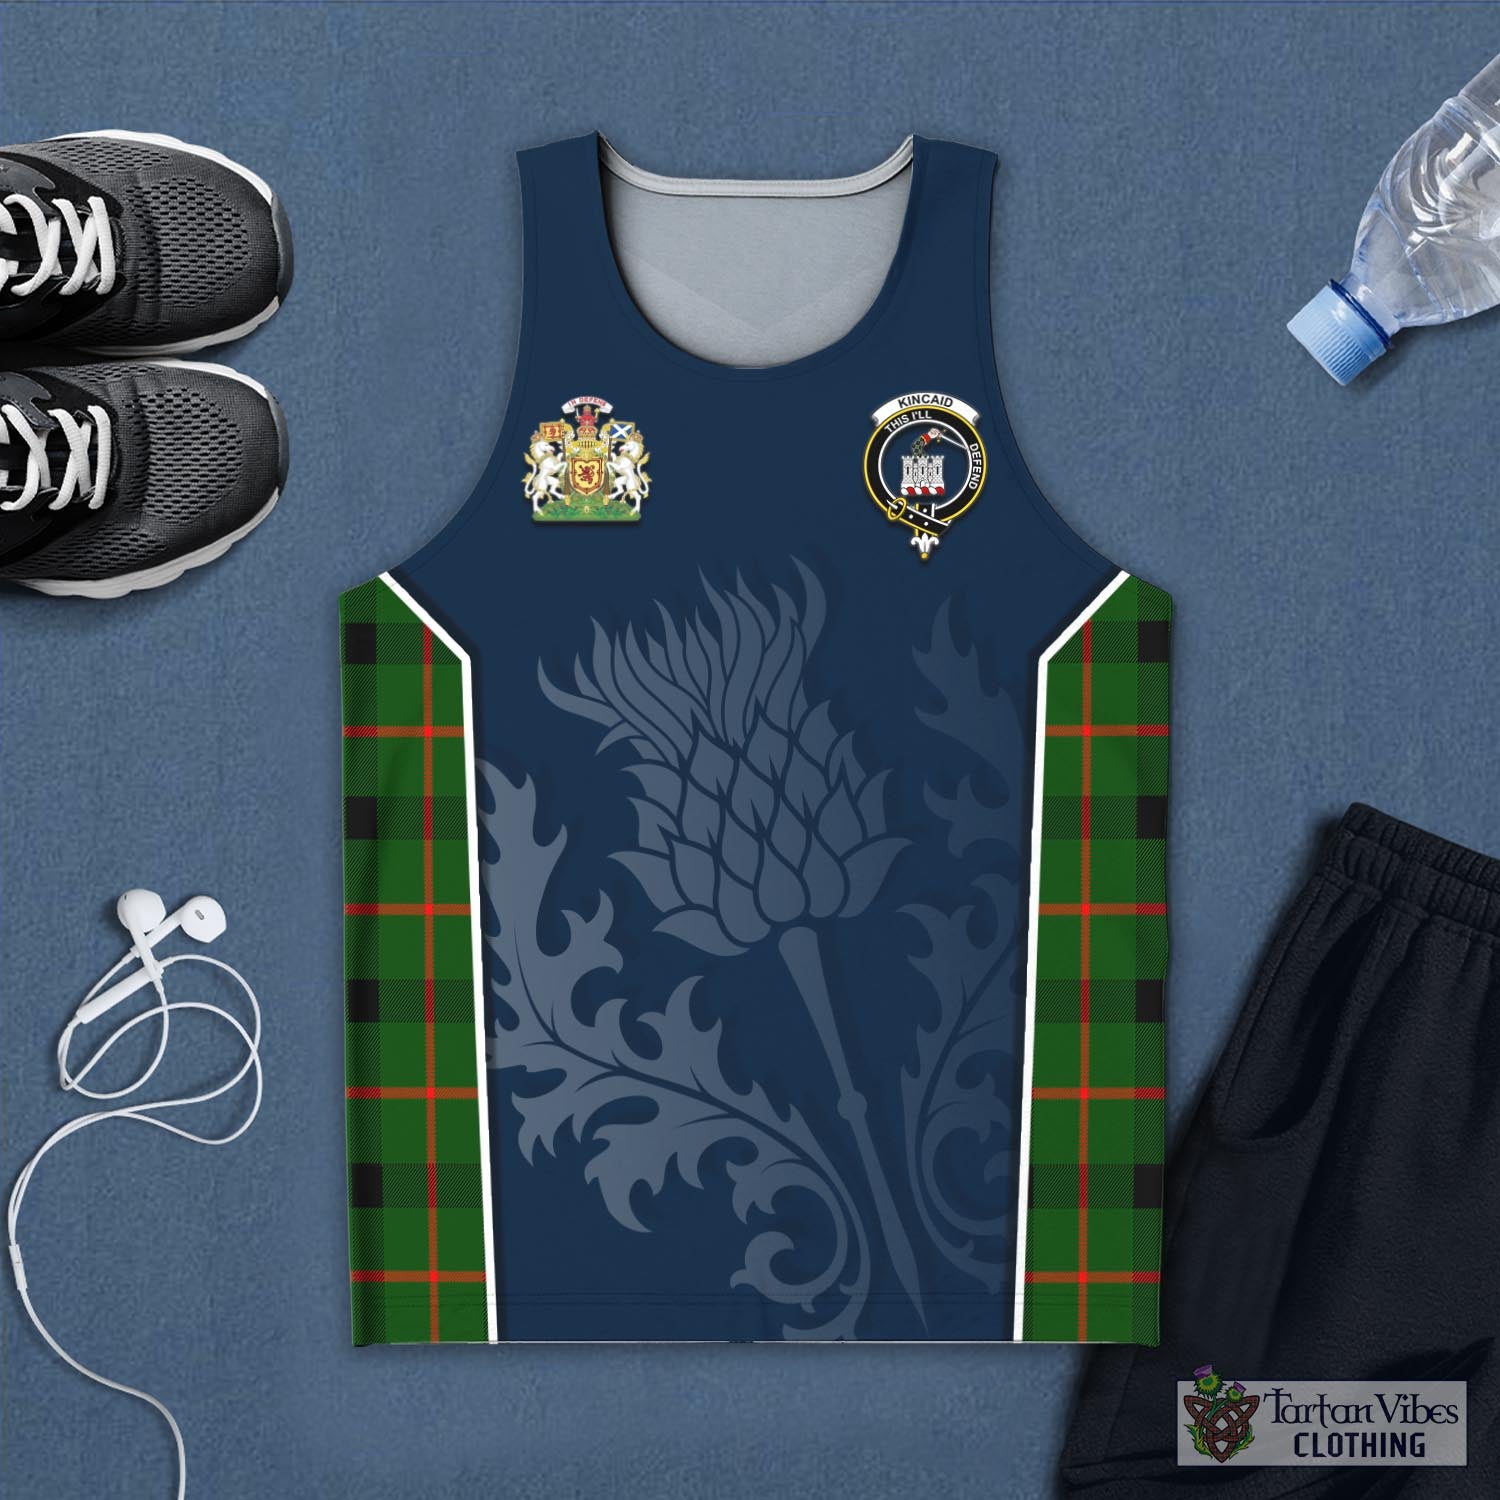 Tartan Vibes Clothing Kincaid Modern Tartan Men's Tanks Top with Family Crest and Scottish Thistle Vibes Sport Style